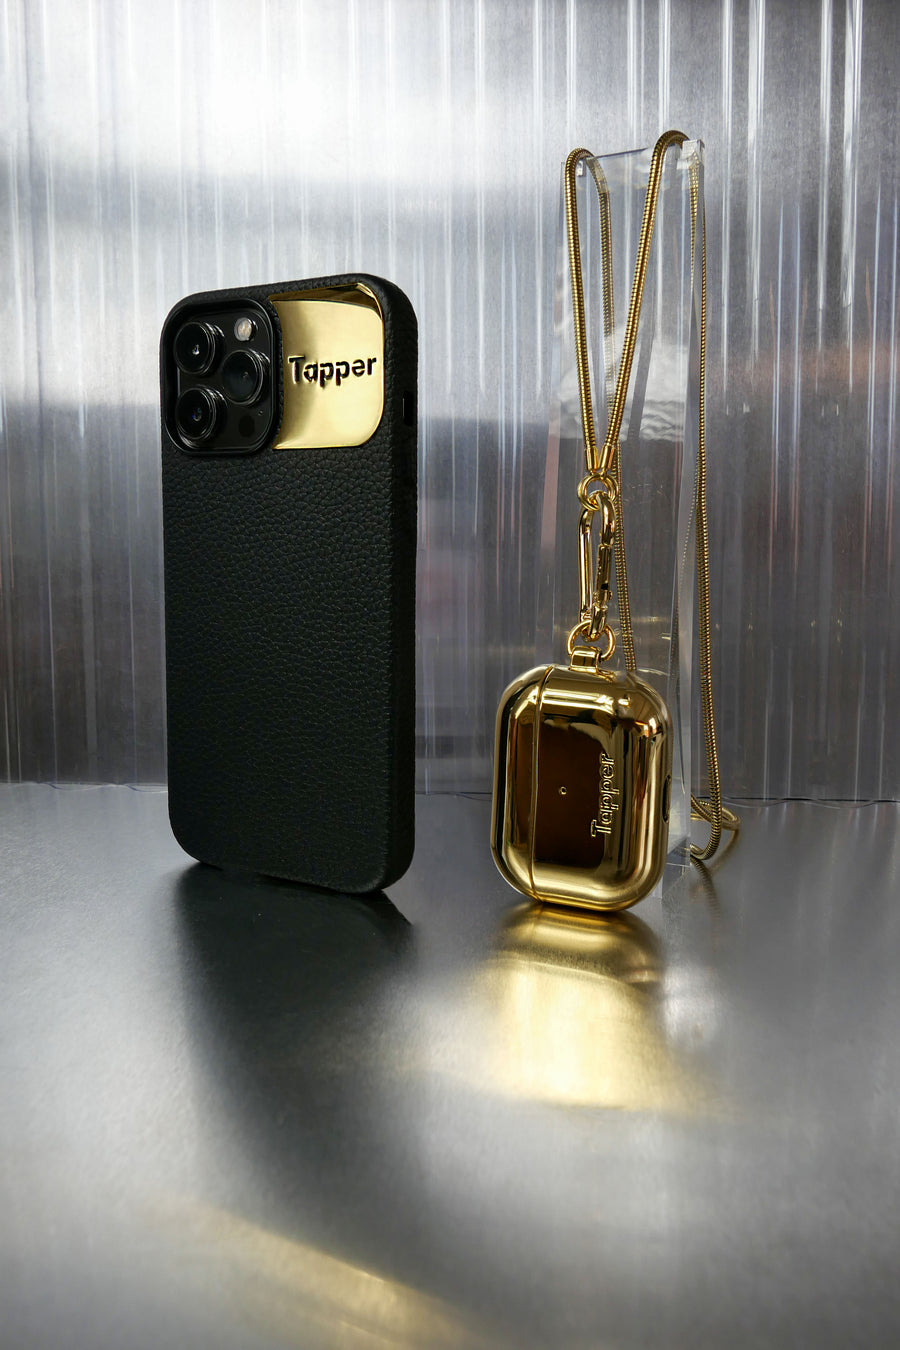 Tapper's real 18K gold plated original metal neck case tech jewelry protects your Apple AirPods Pro. The luxurious, elevated and accessible neck case plated in precious metals steps up your AirPods Pro jewellery game. Worried about losing your AirPods? Detachable snake chain and carabiner for convenient and hassle-free safekeeping around your neck. The next must-have accessory crafted for ultimate luxury. Compatible with AirPods Pro. Designed in Sweden by Tapper. Free Express Shipping at gettapper.com